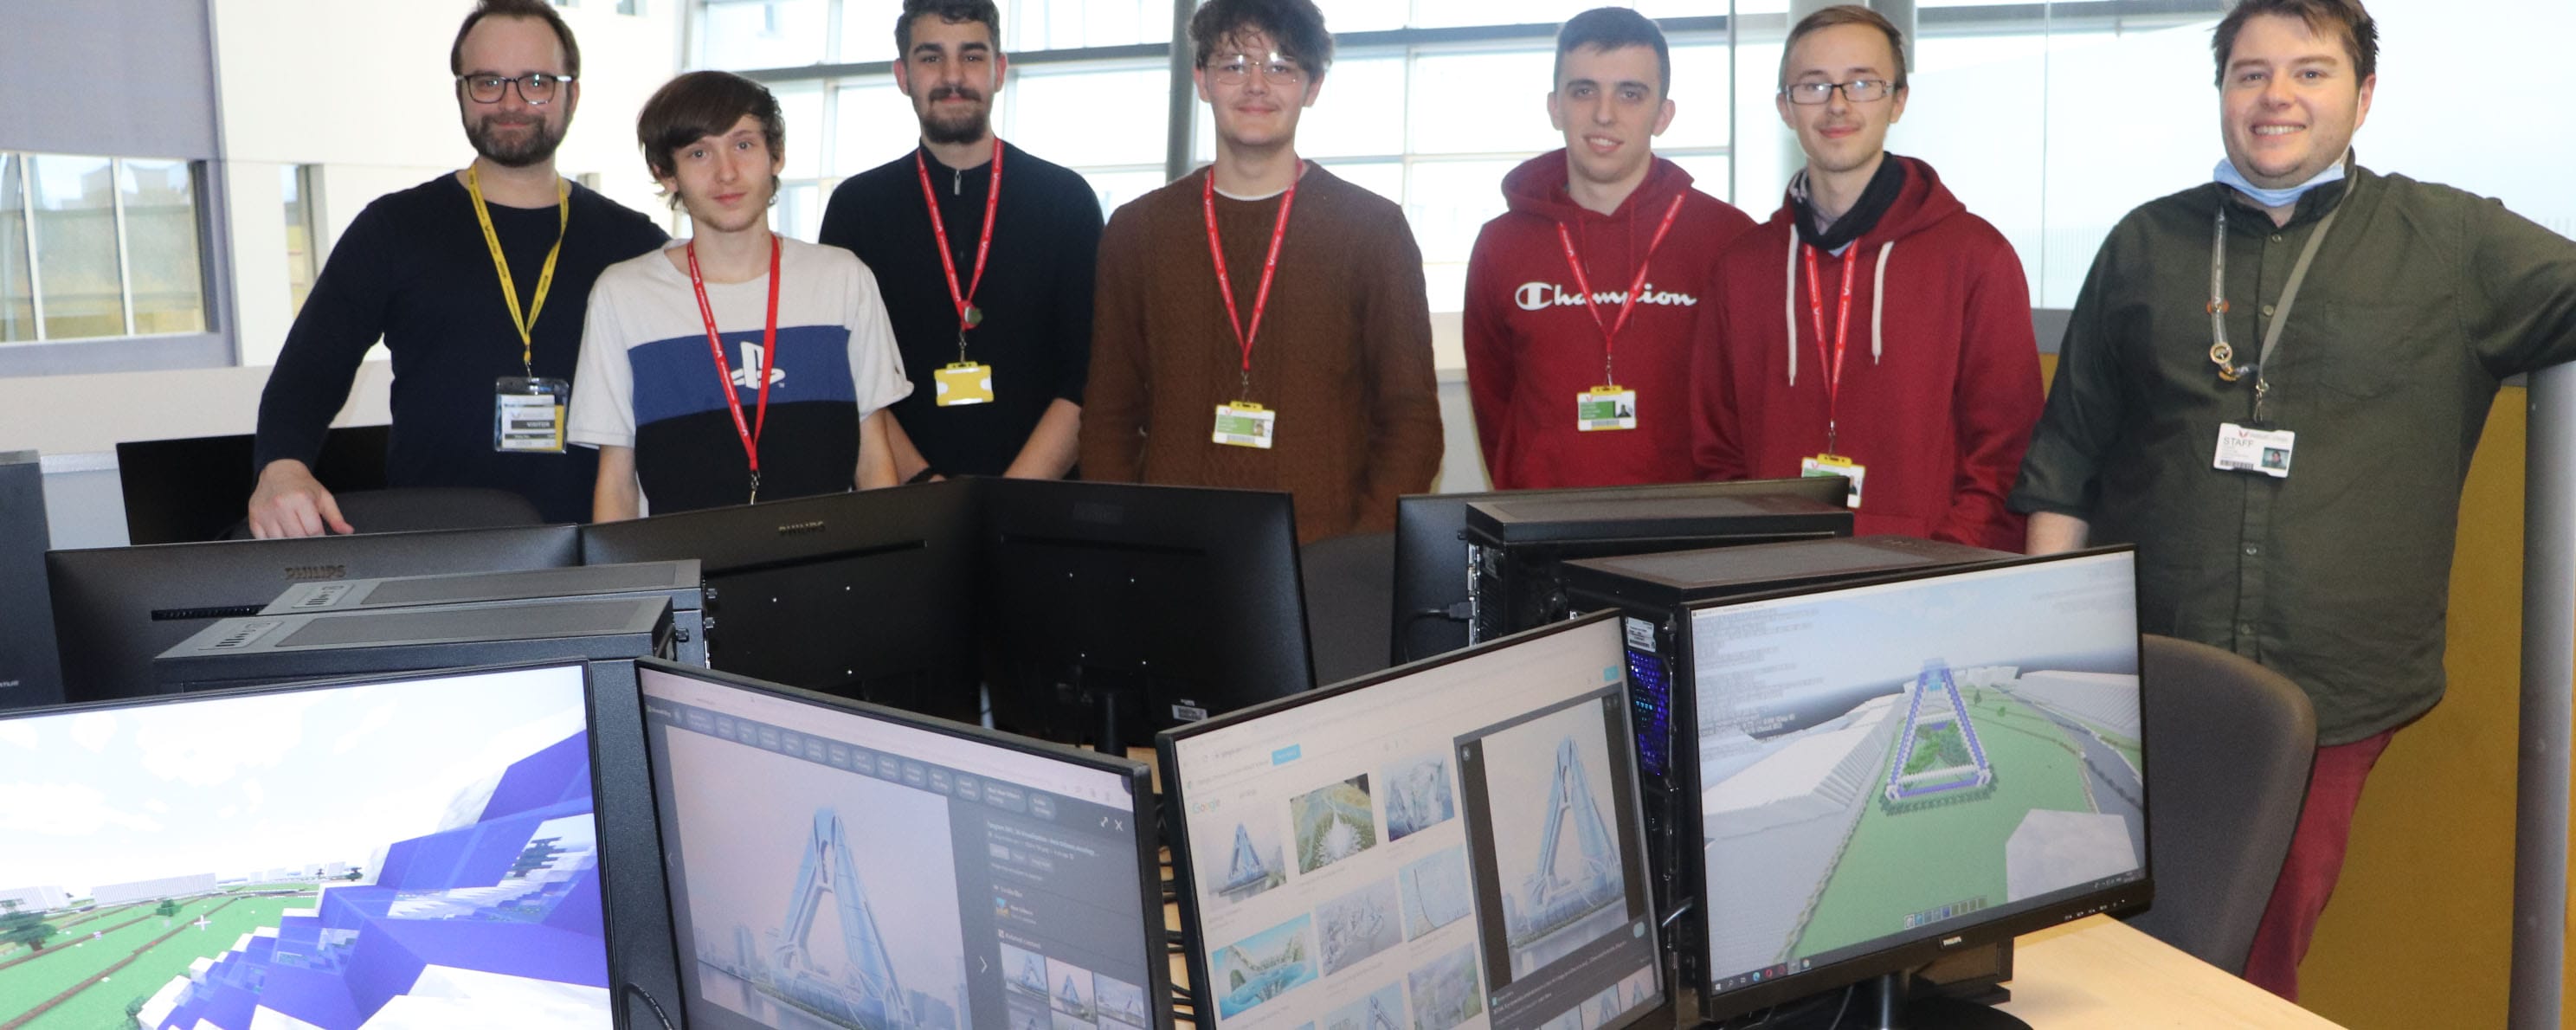 group shot of students posing behind pc screens showing design work